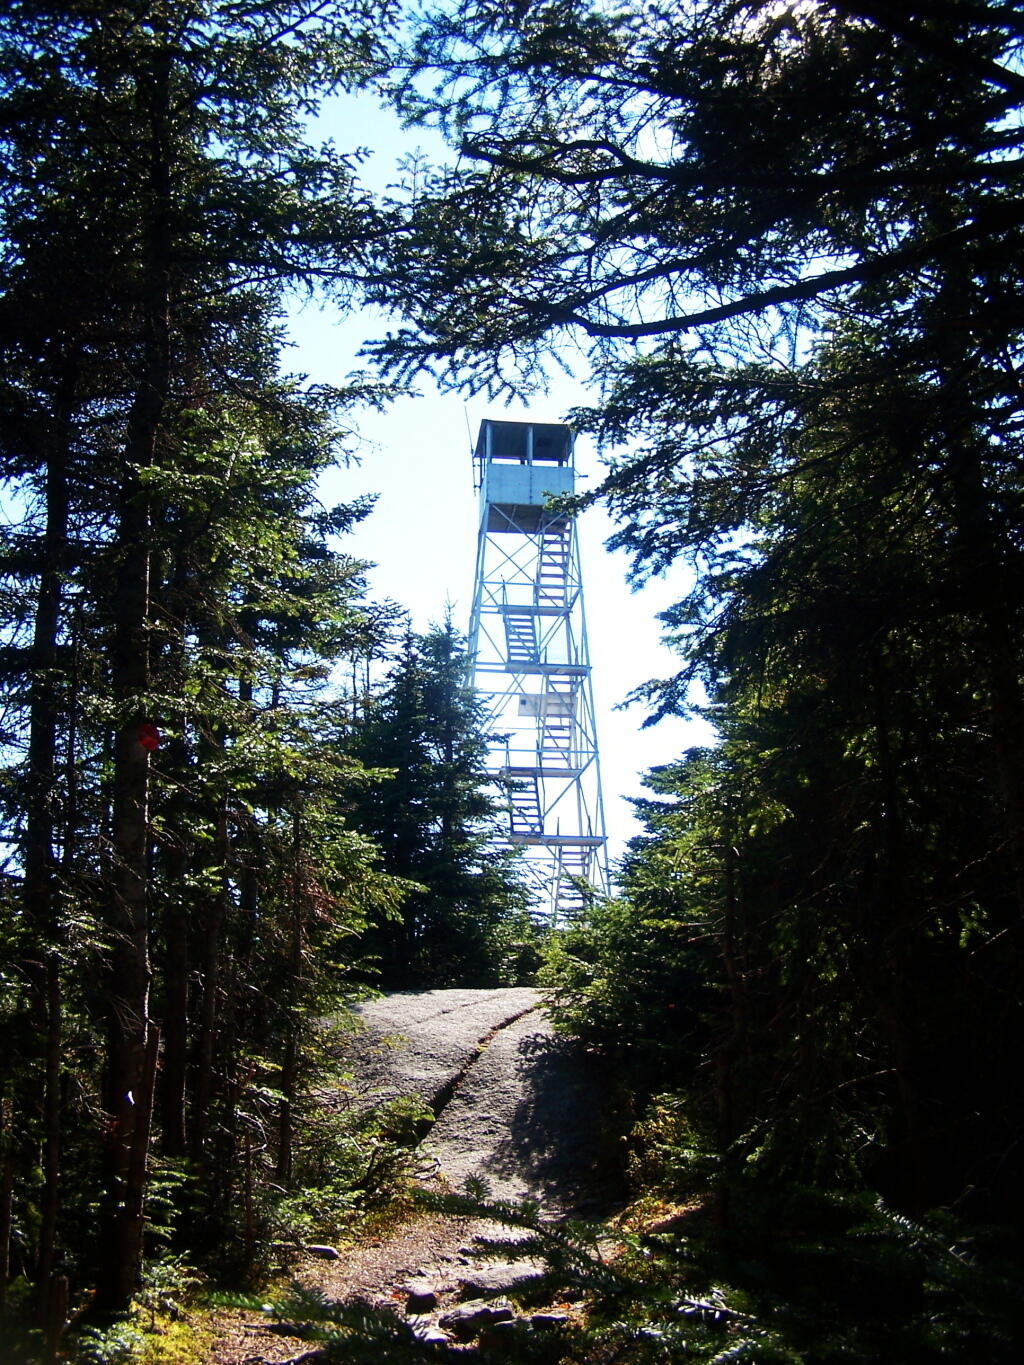 There's the Lyon Mountain Firetower